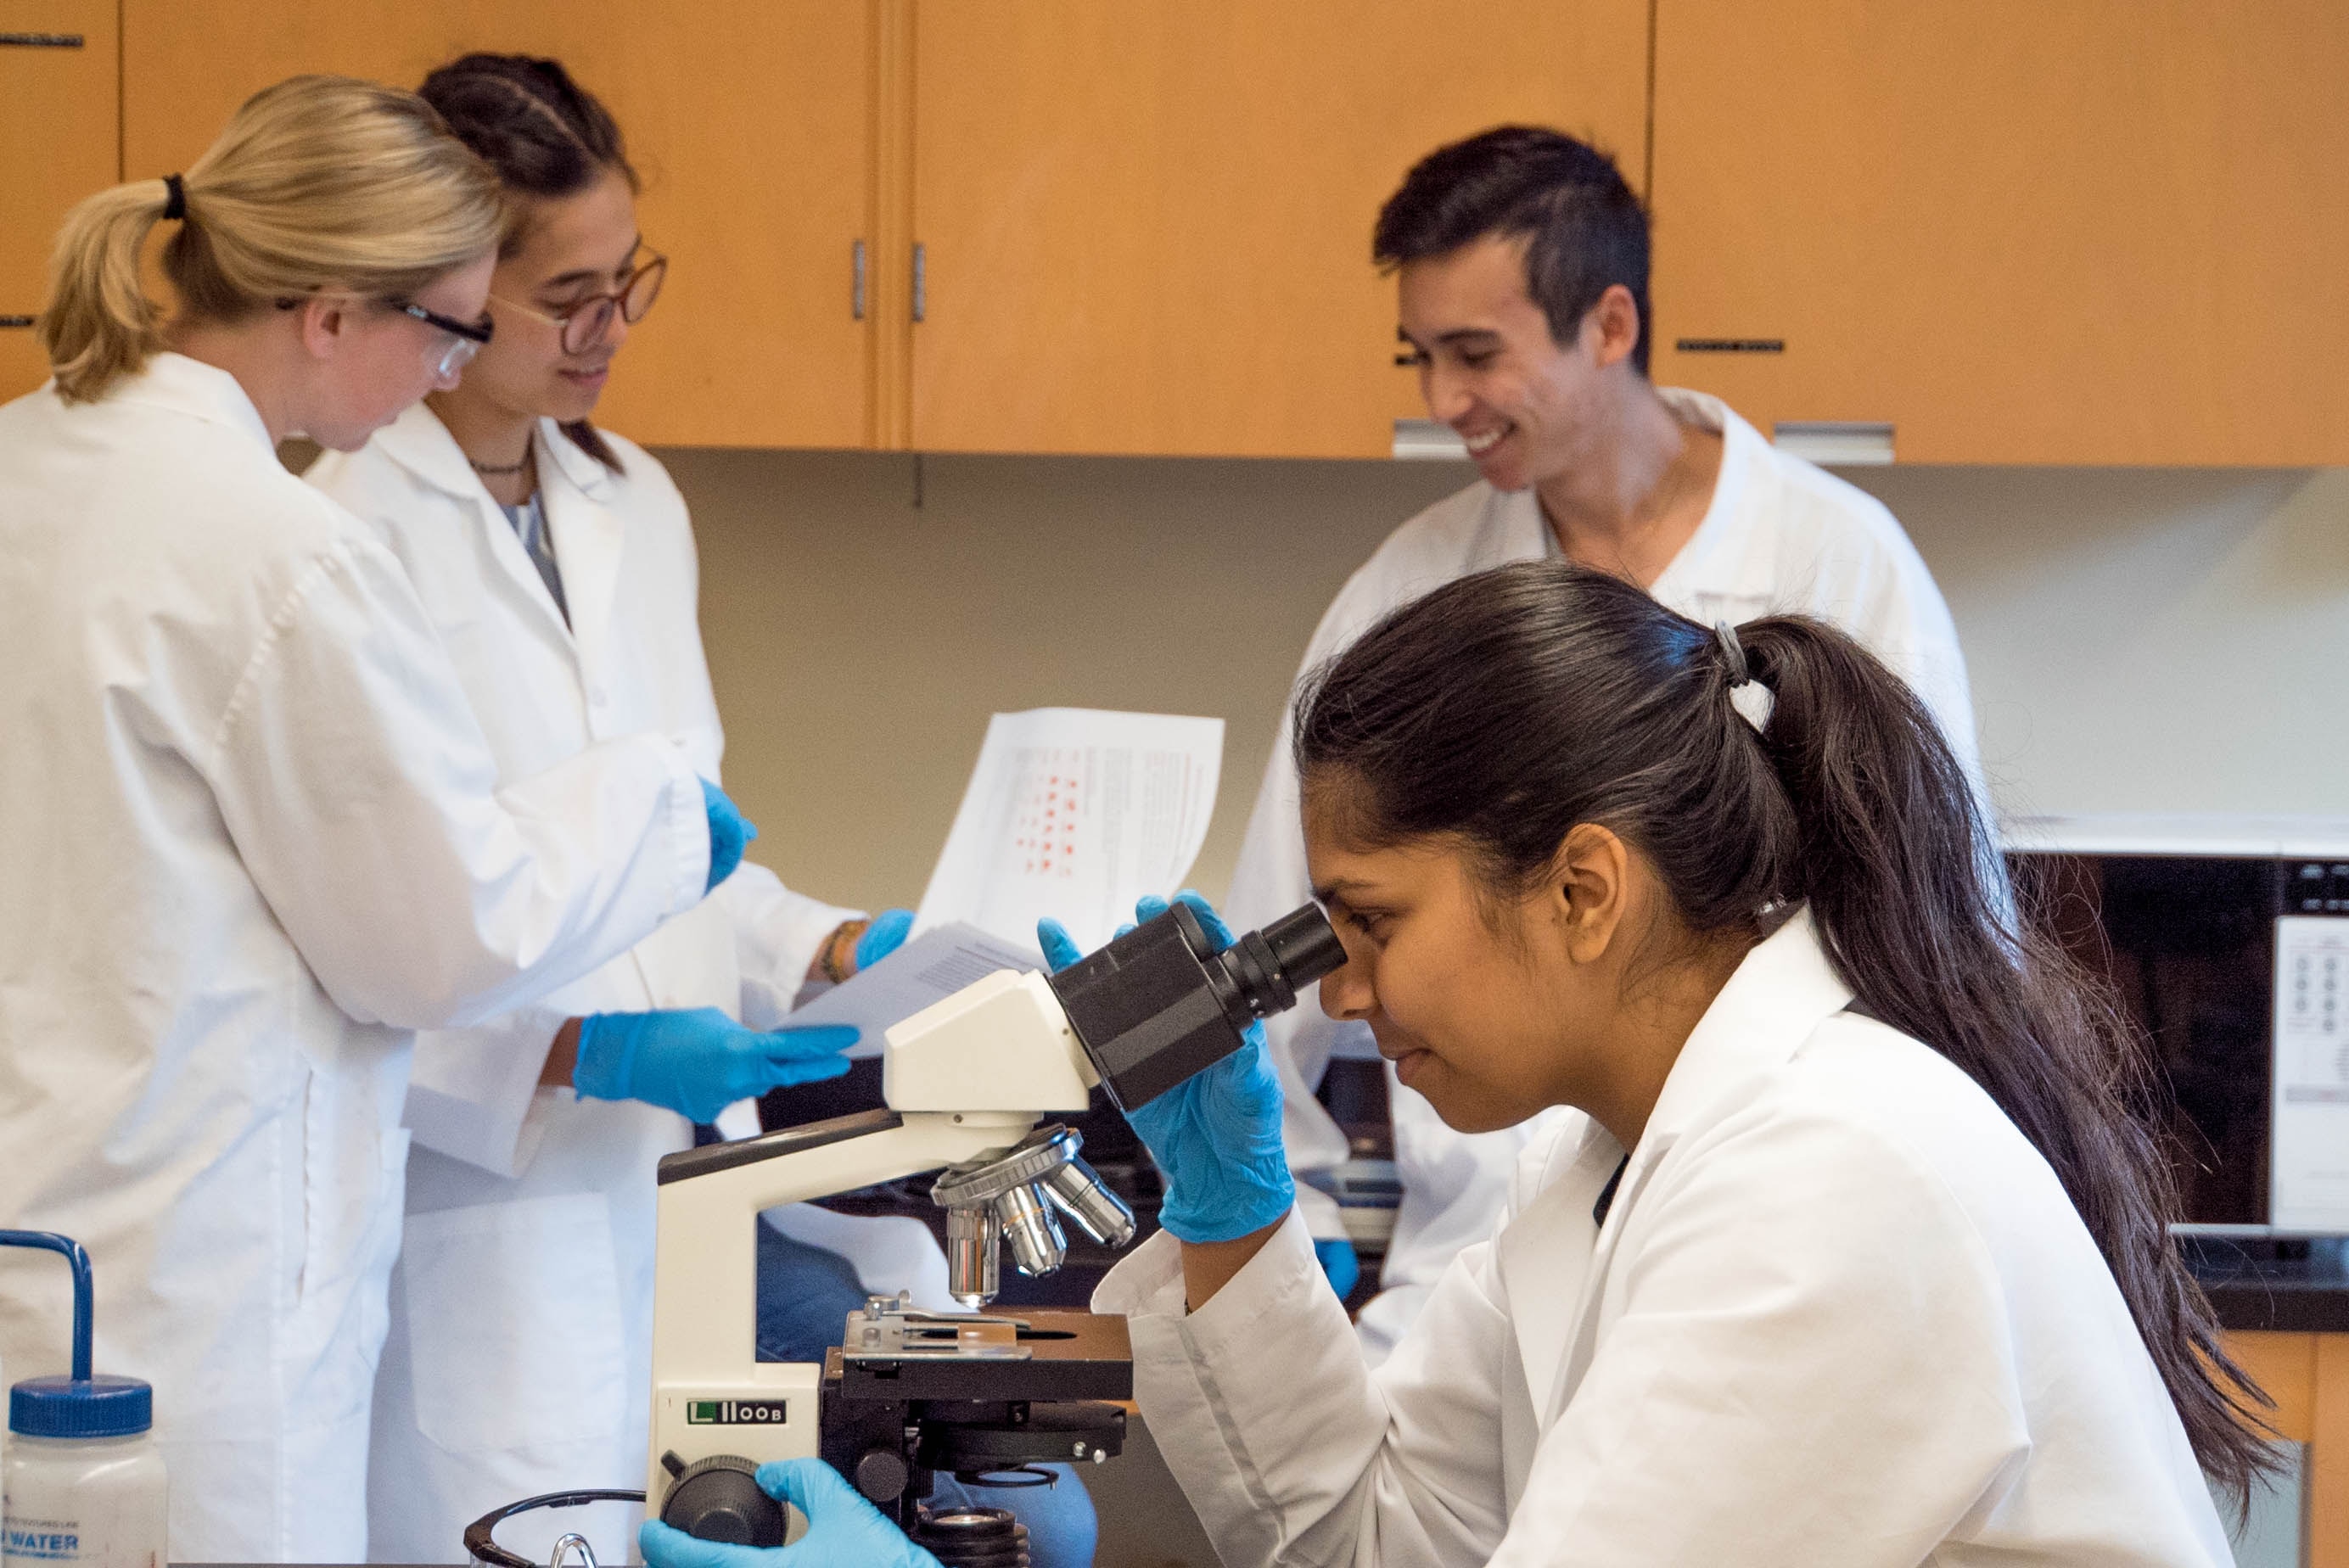 Four people in a scientific lab. One is looking through a microscope. The other three are smiling while looking at a paper document together.